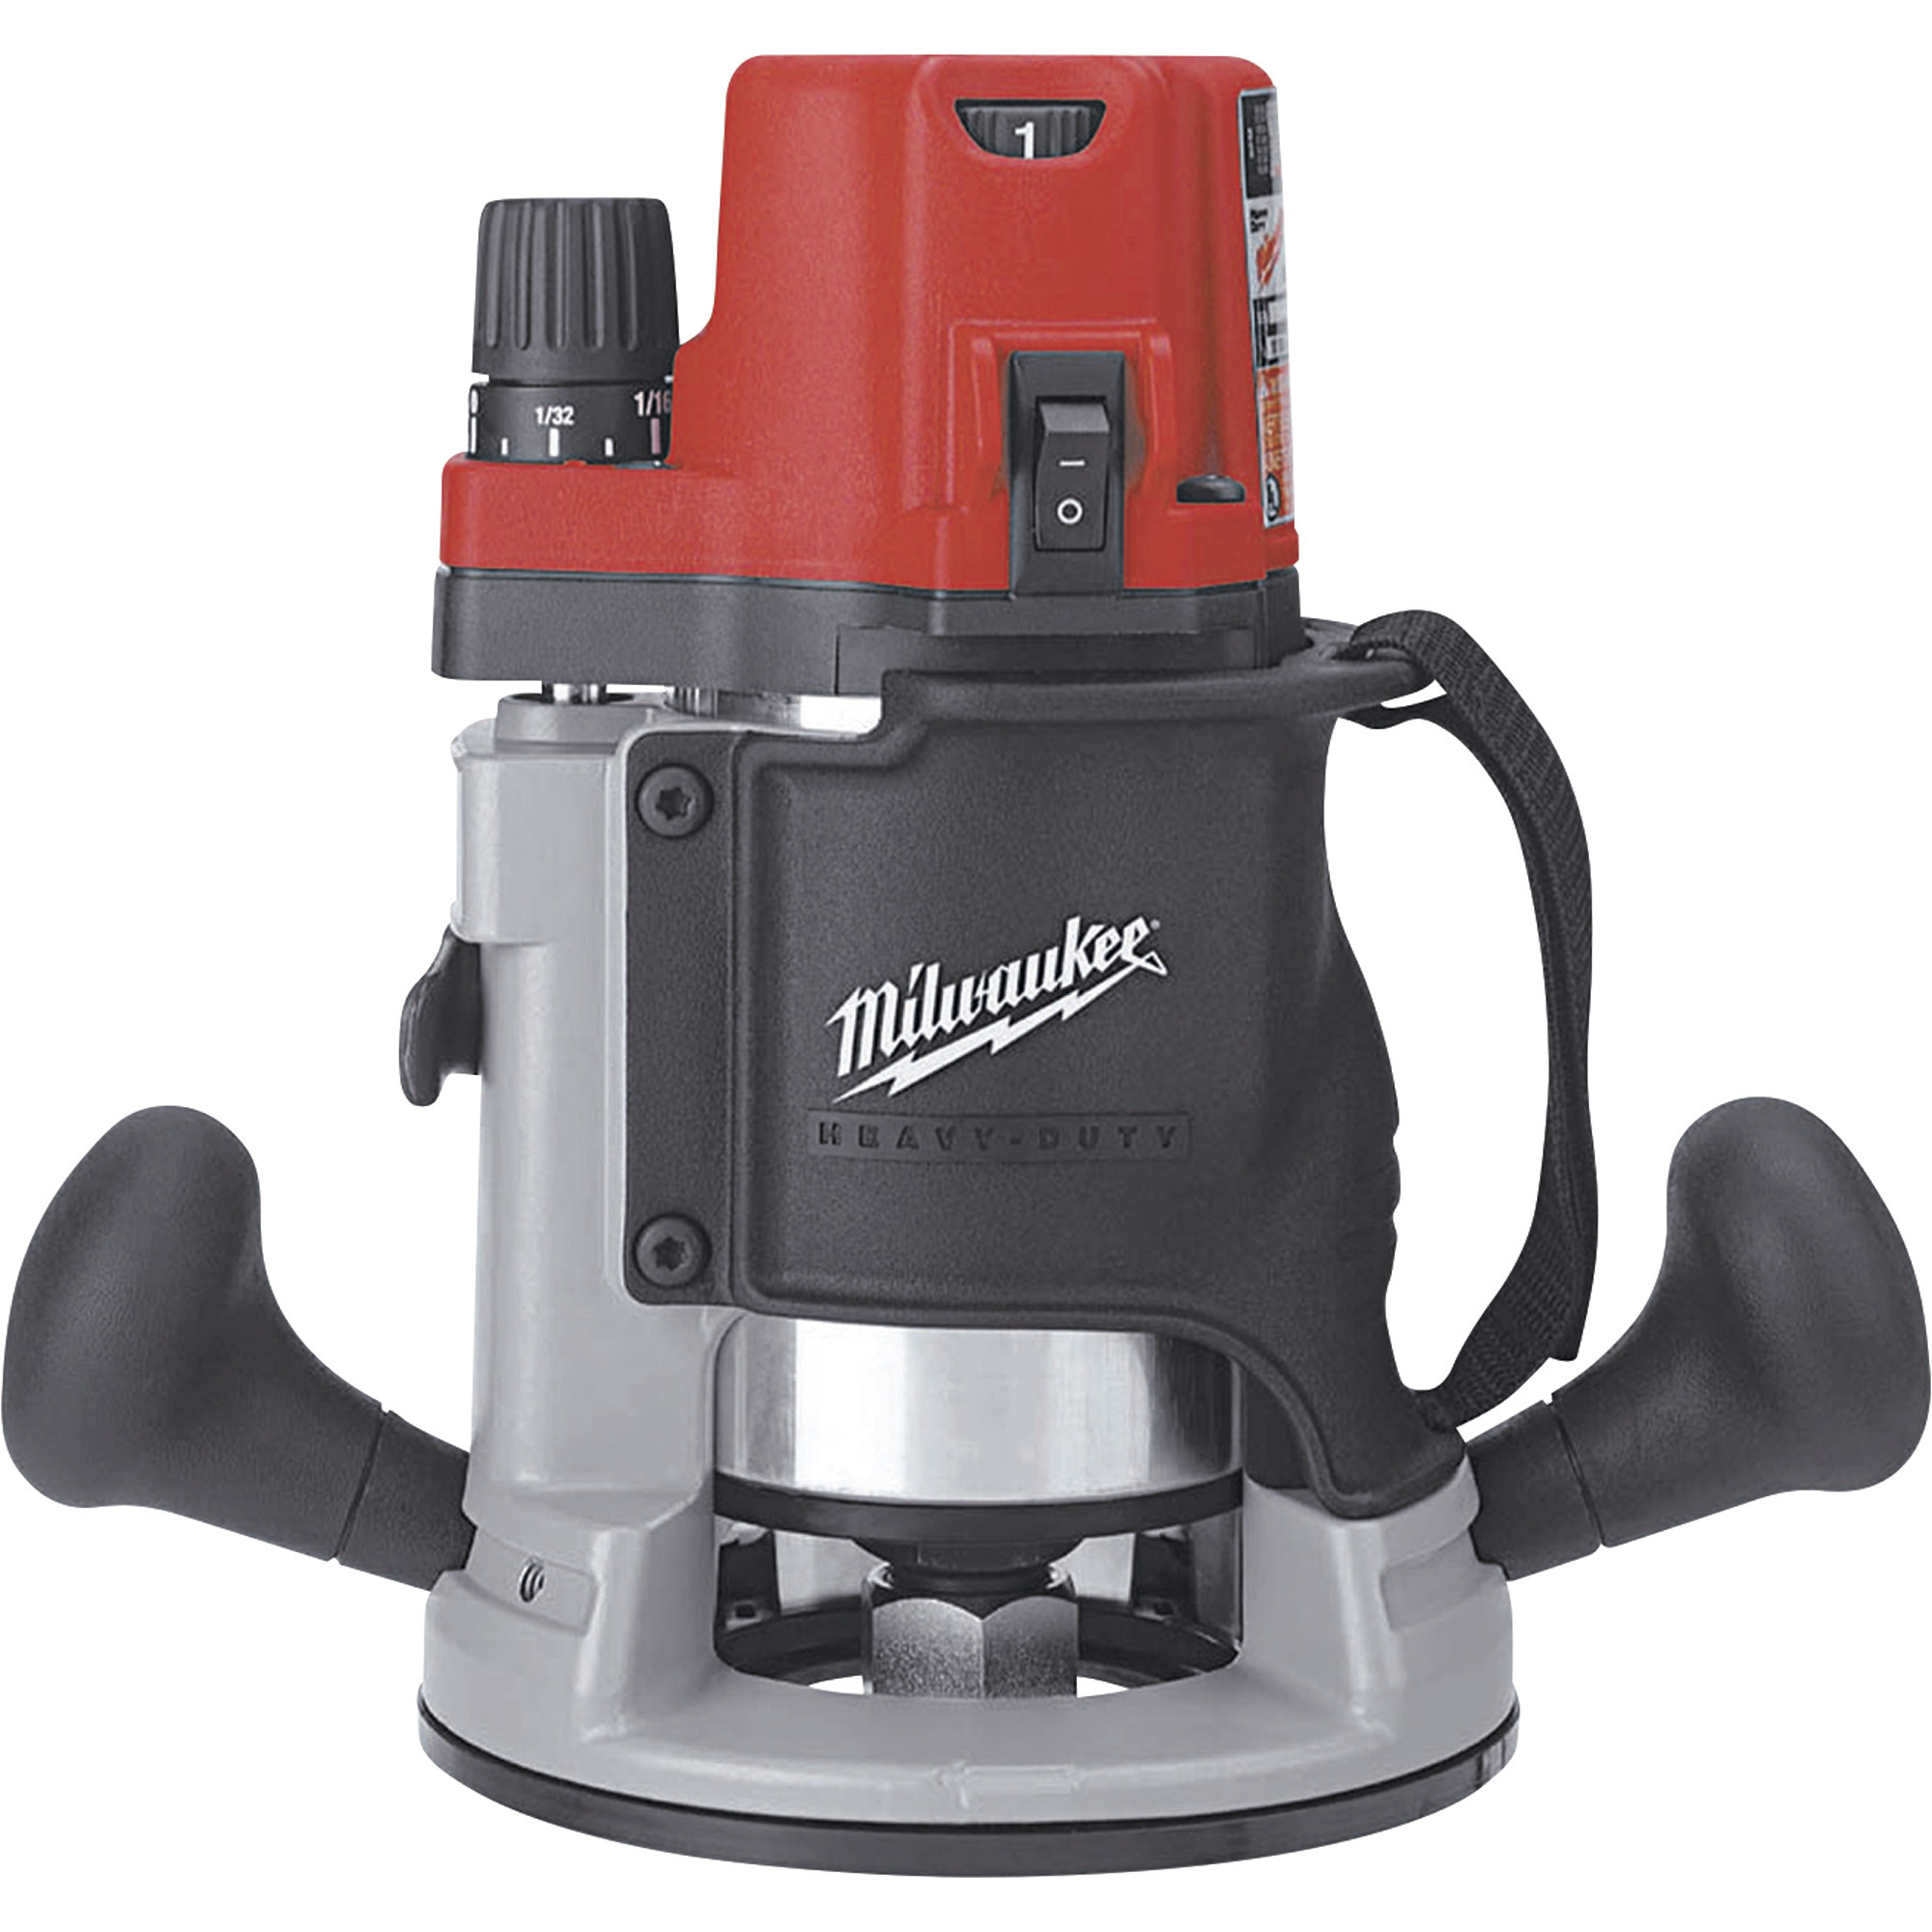 Milwaukee 2 1/4 HP Router, Electronic Variable Speed BodyGrip, Model 5616-20